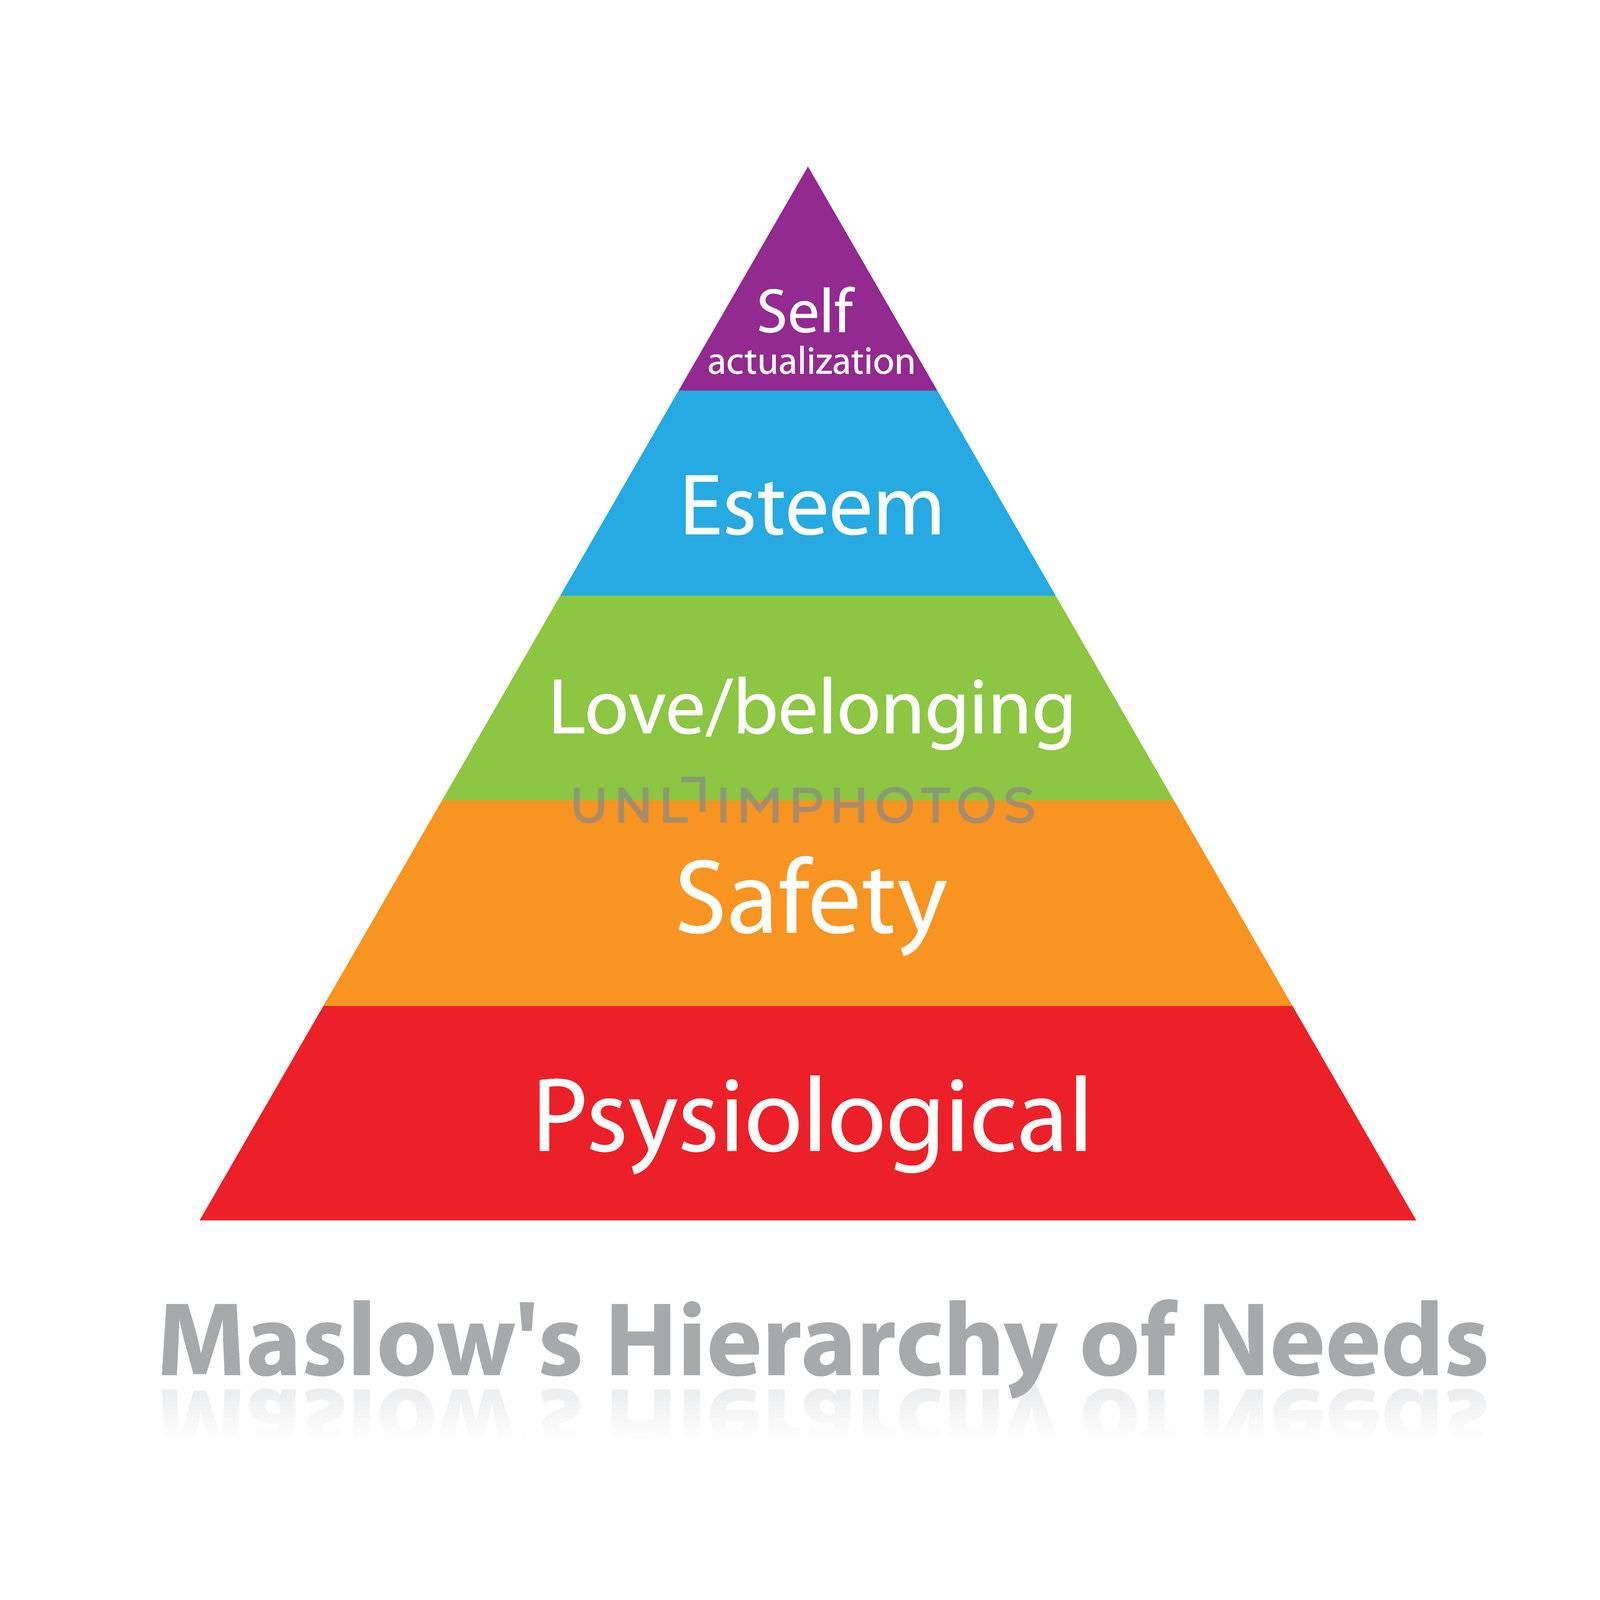 Maslow's-Hierarchy-Needs by antoshkaforever